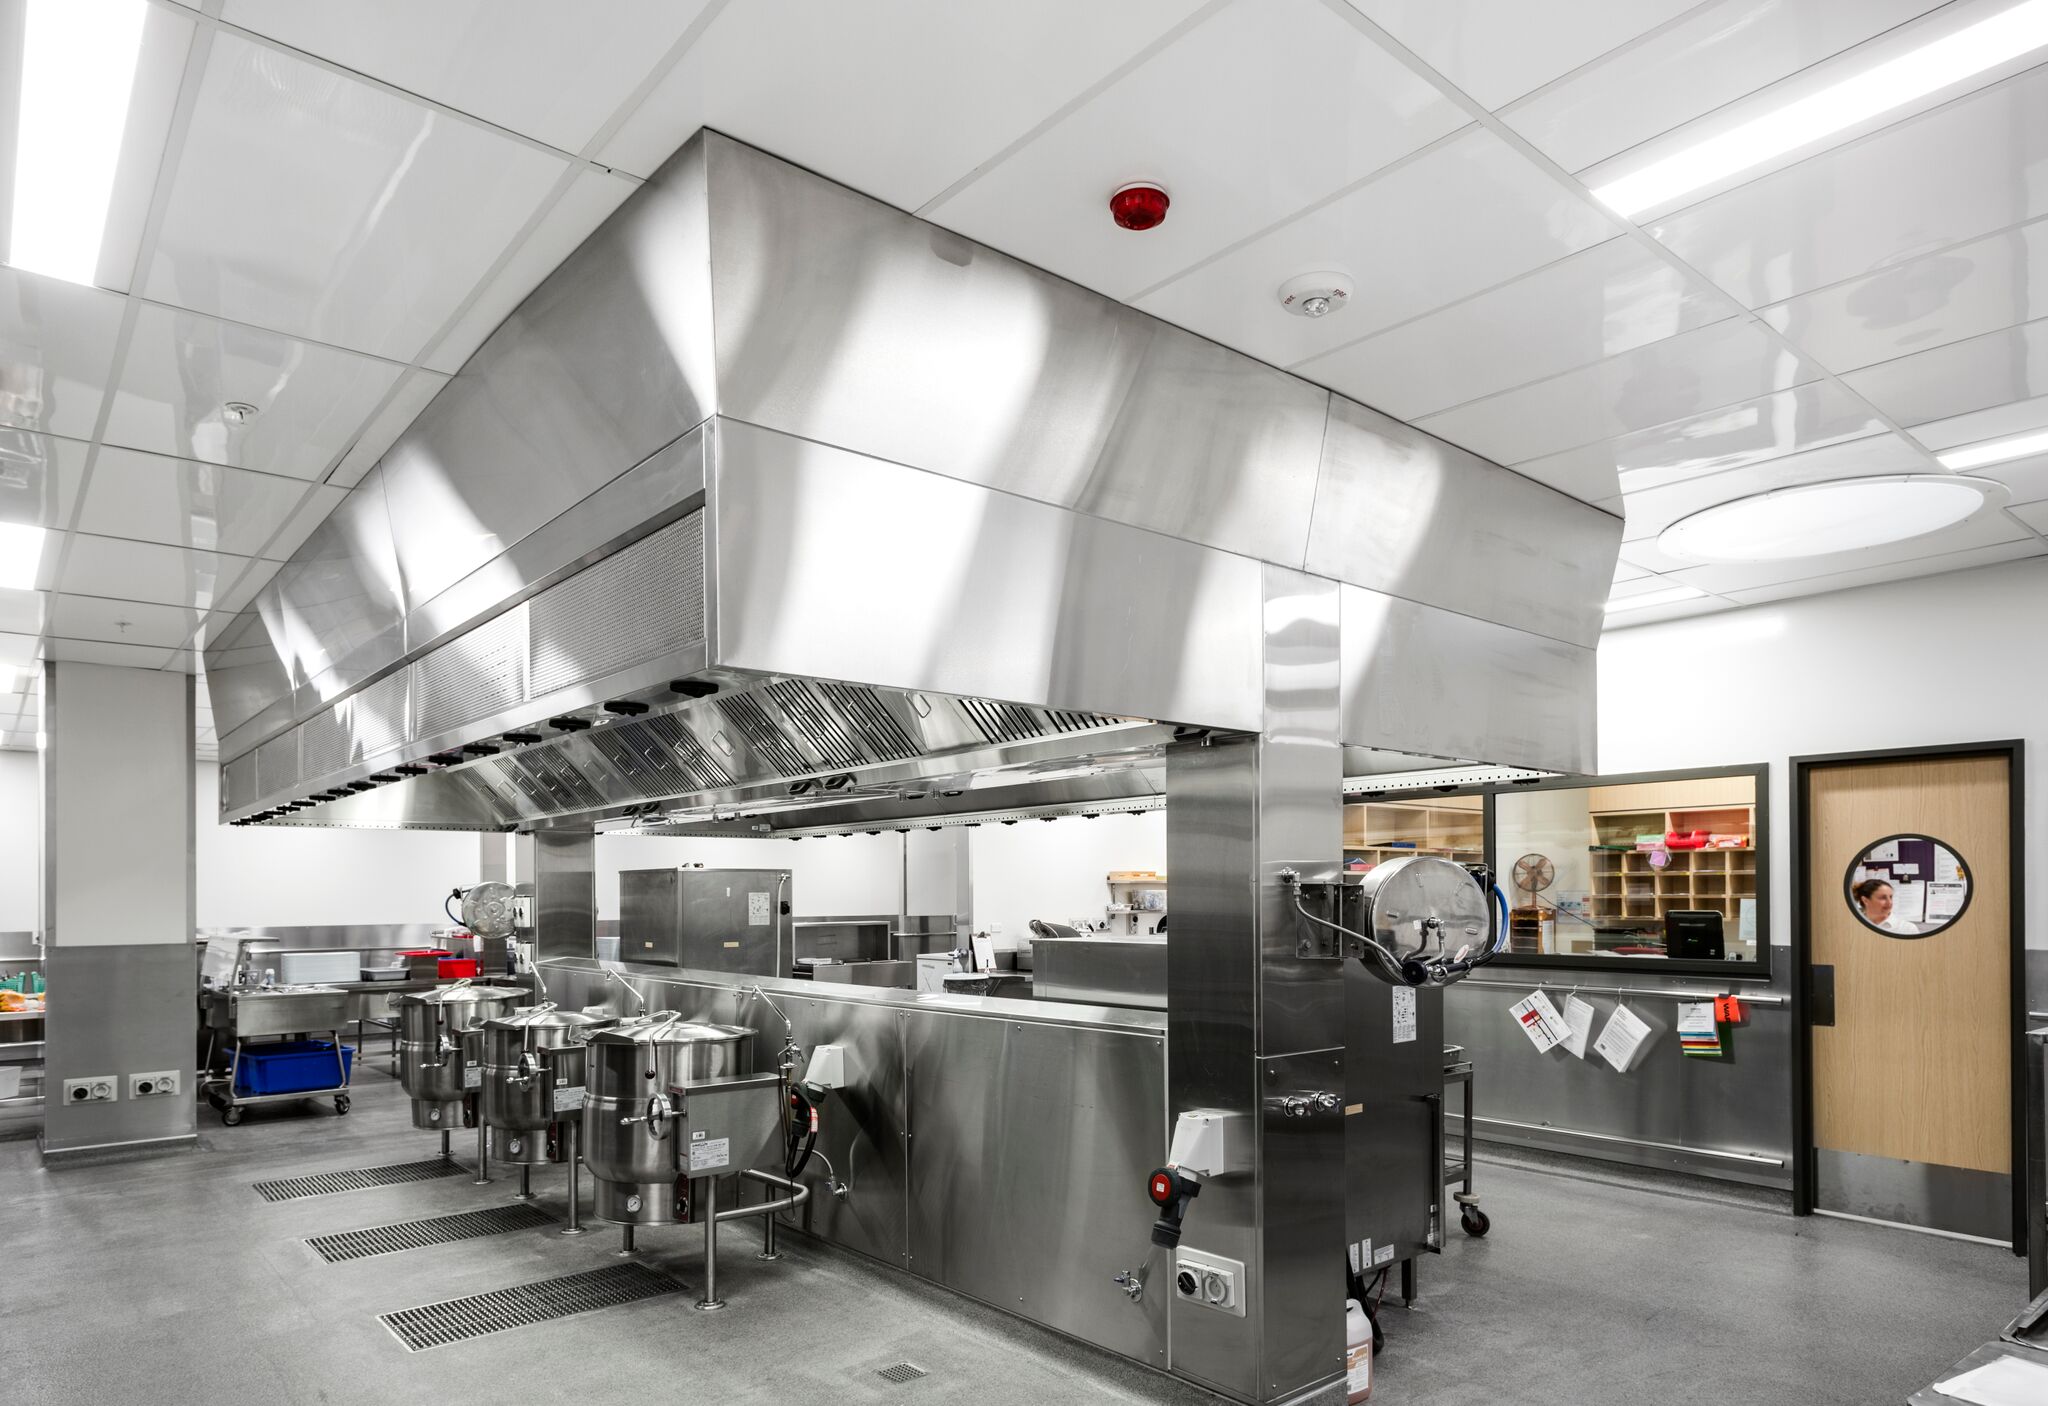 hot air rises: the right commercial ceiling tiles – eboss